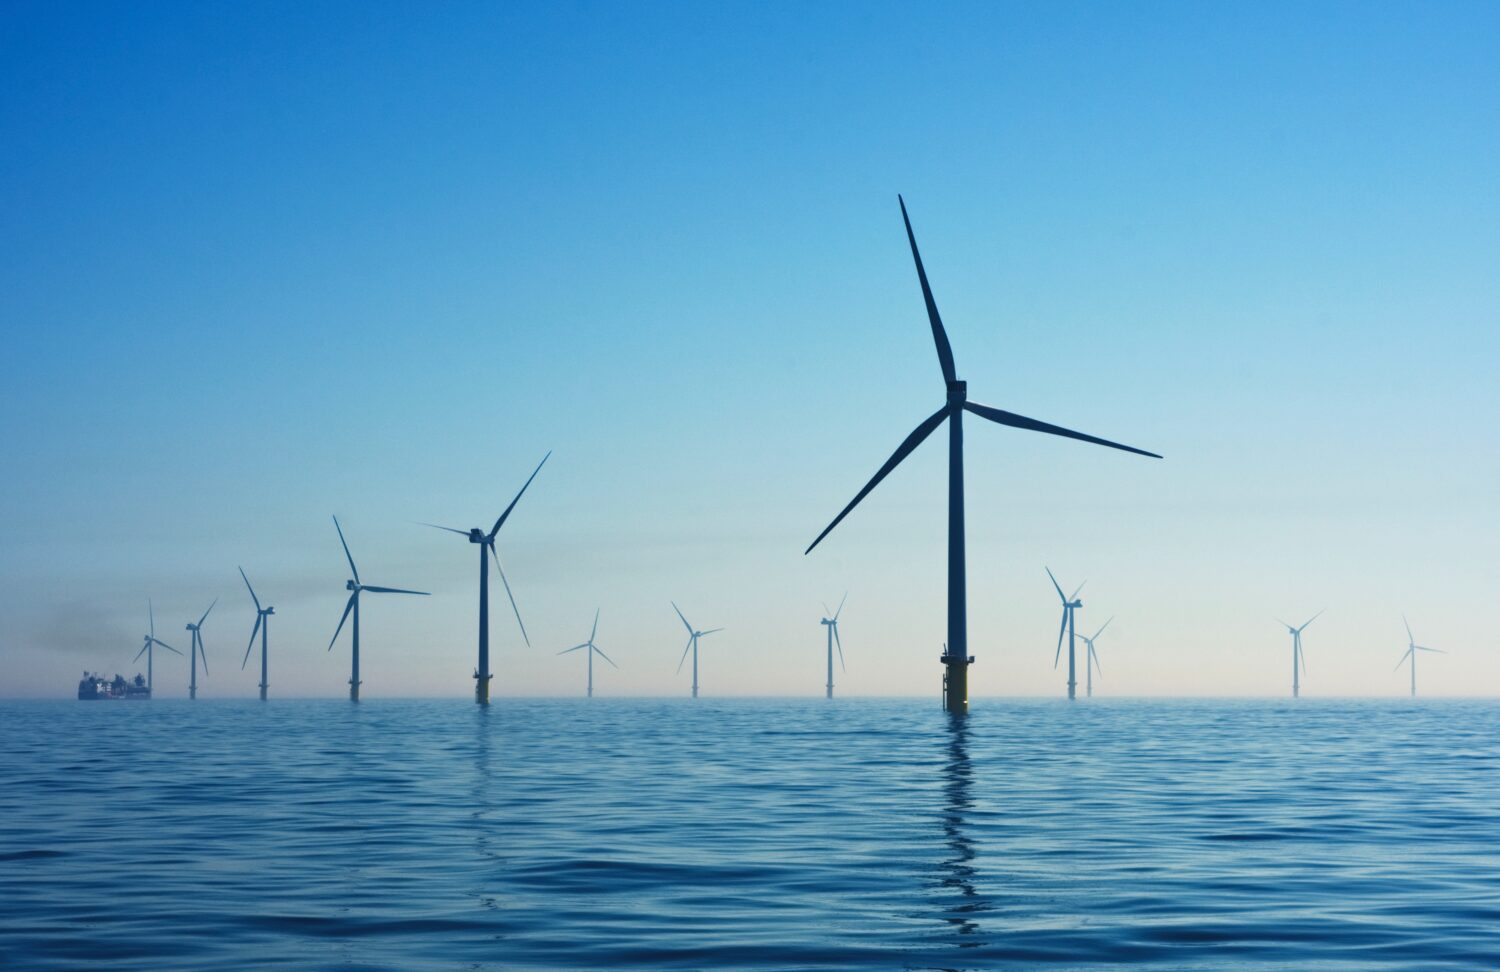 Turbines in Trouble: The Controversy Behind Vineyard Wind & Offshore Wind  in Massachusetts - Harvard Political Review